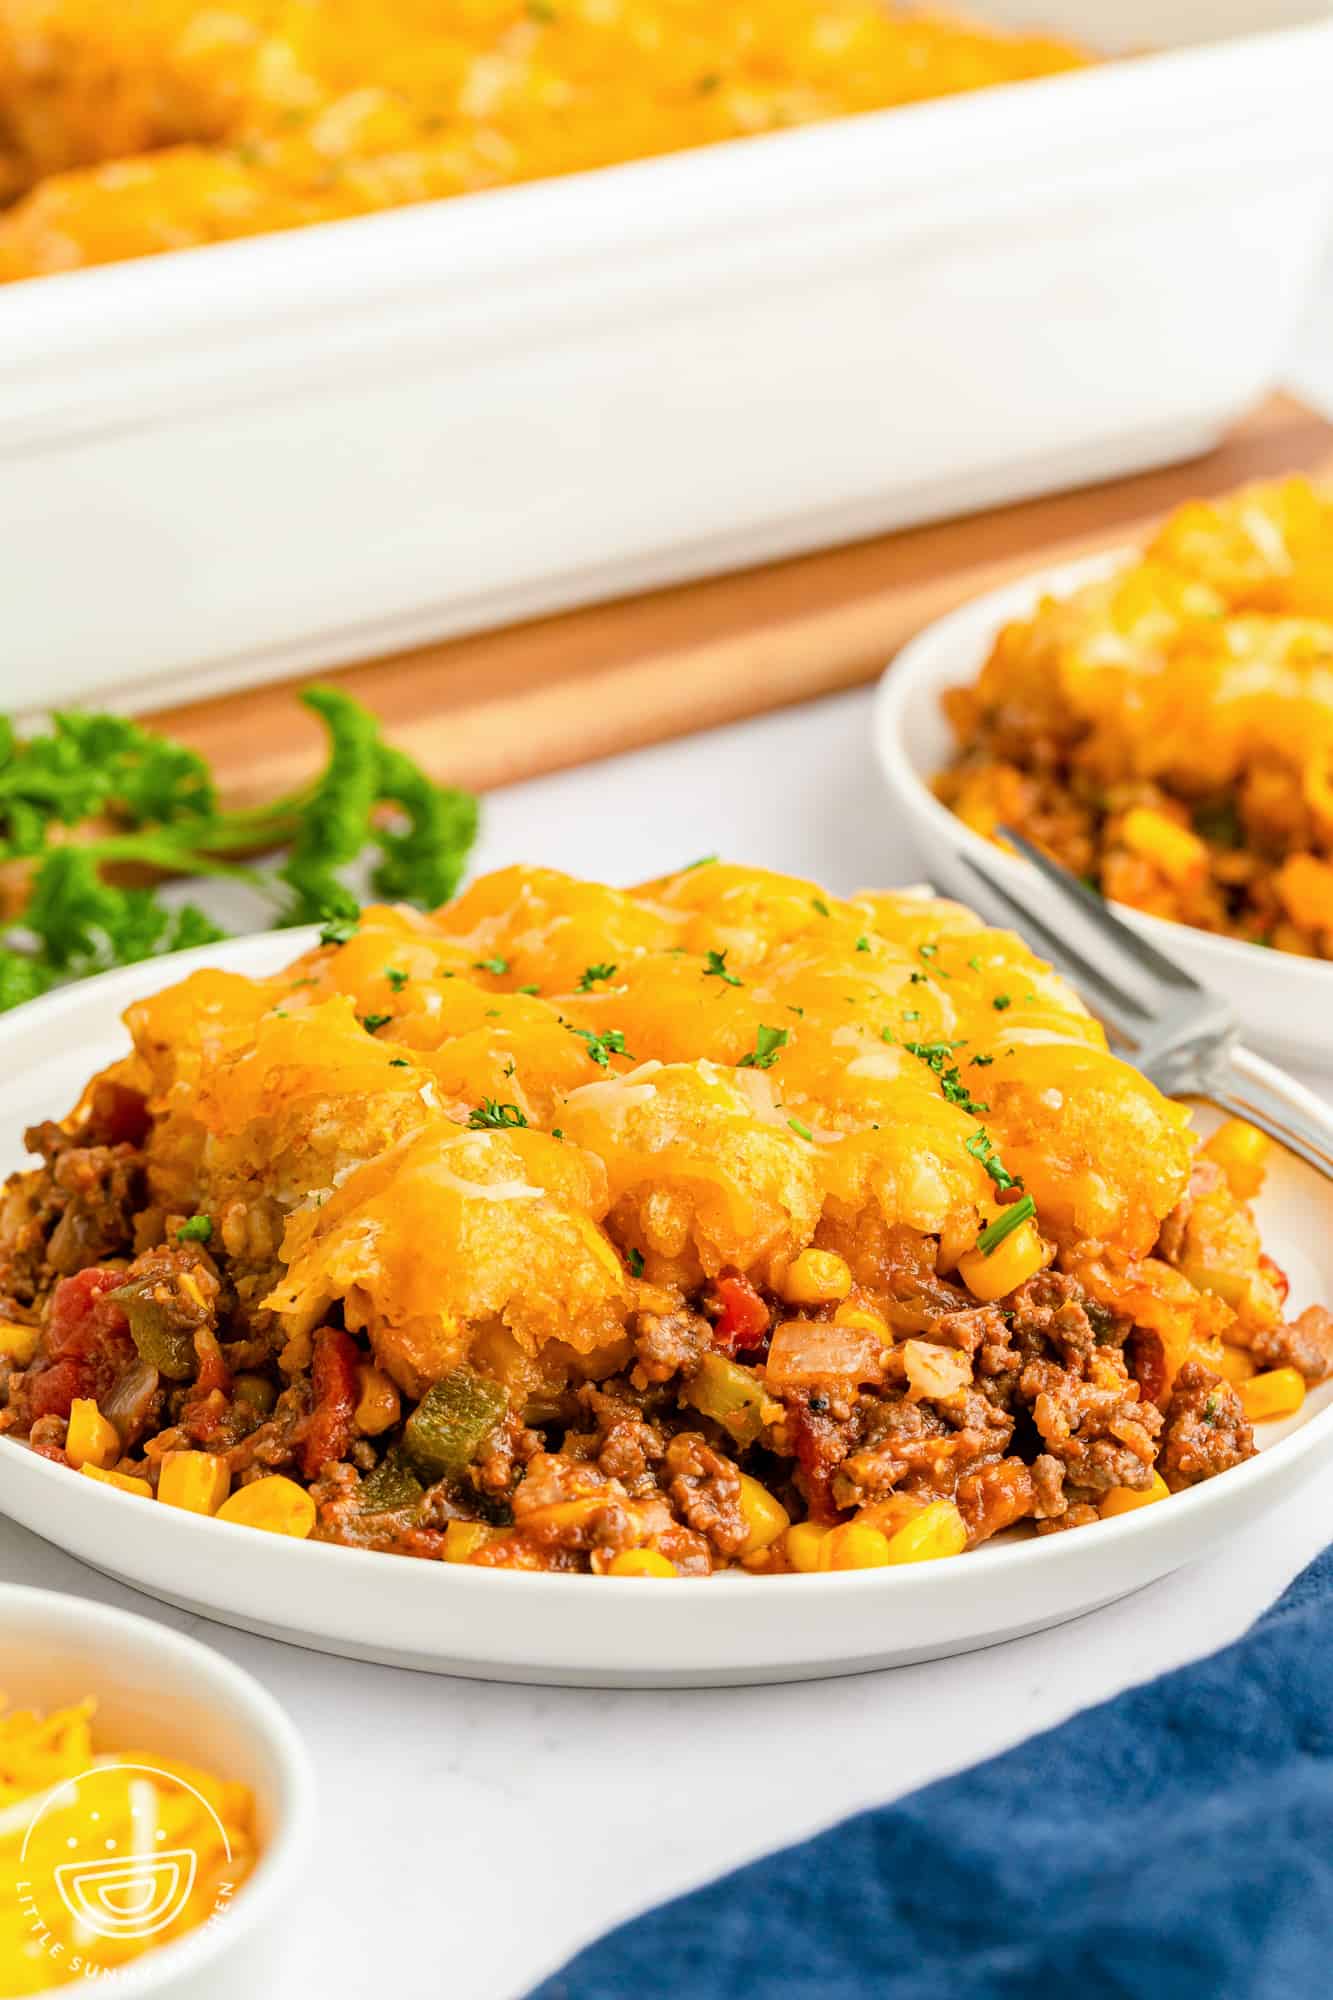 a plate filled with a large portion of sloppy joe casserole with tater tot topping